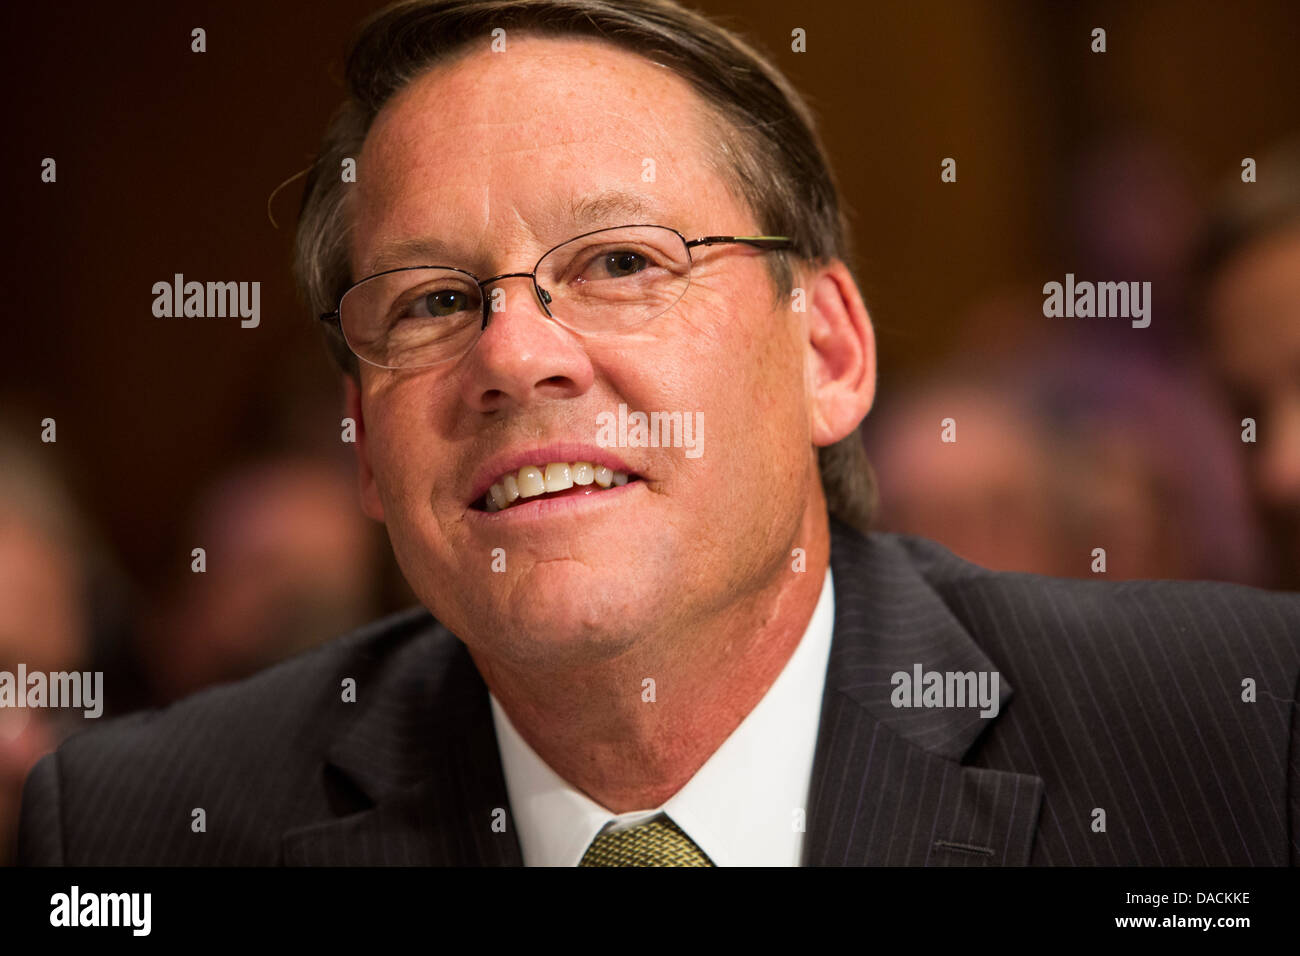 C. Larry Pope, President and CEO of Smithfield Foods, Inc. Stock Photo